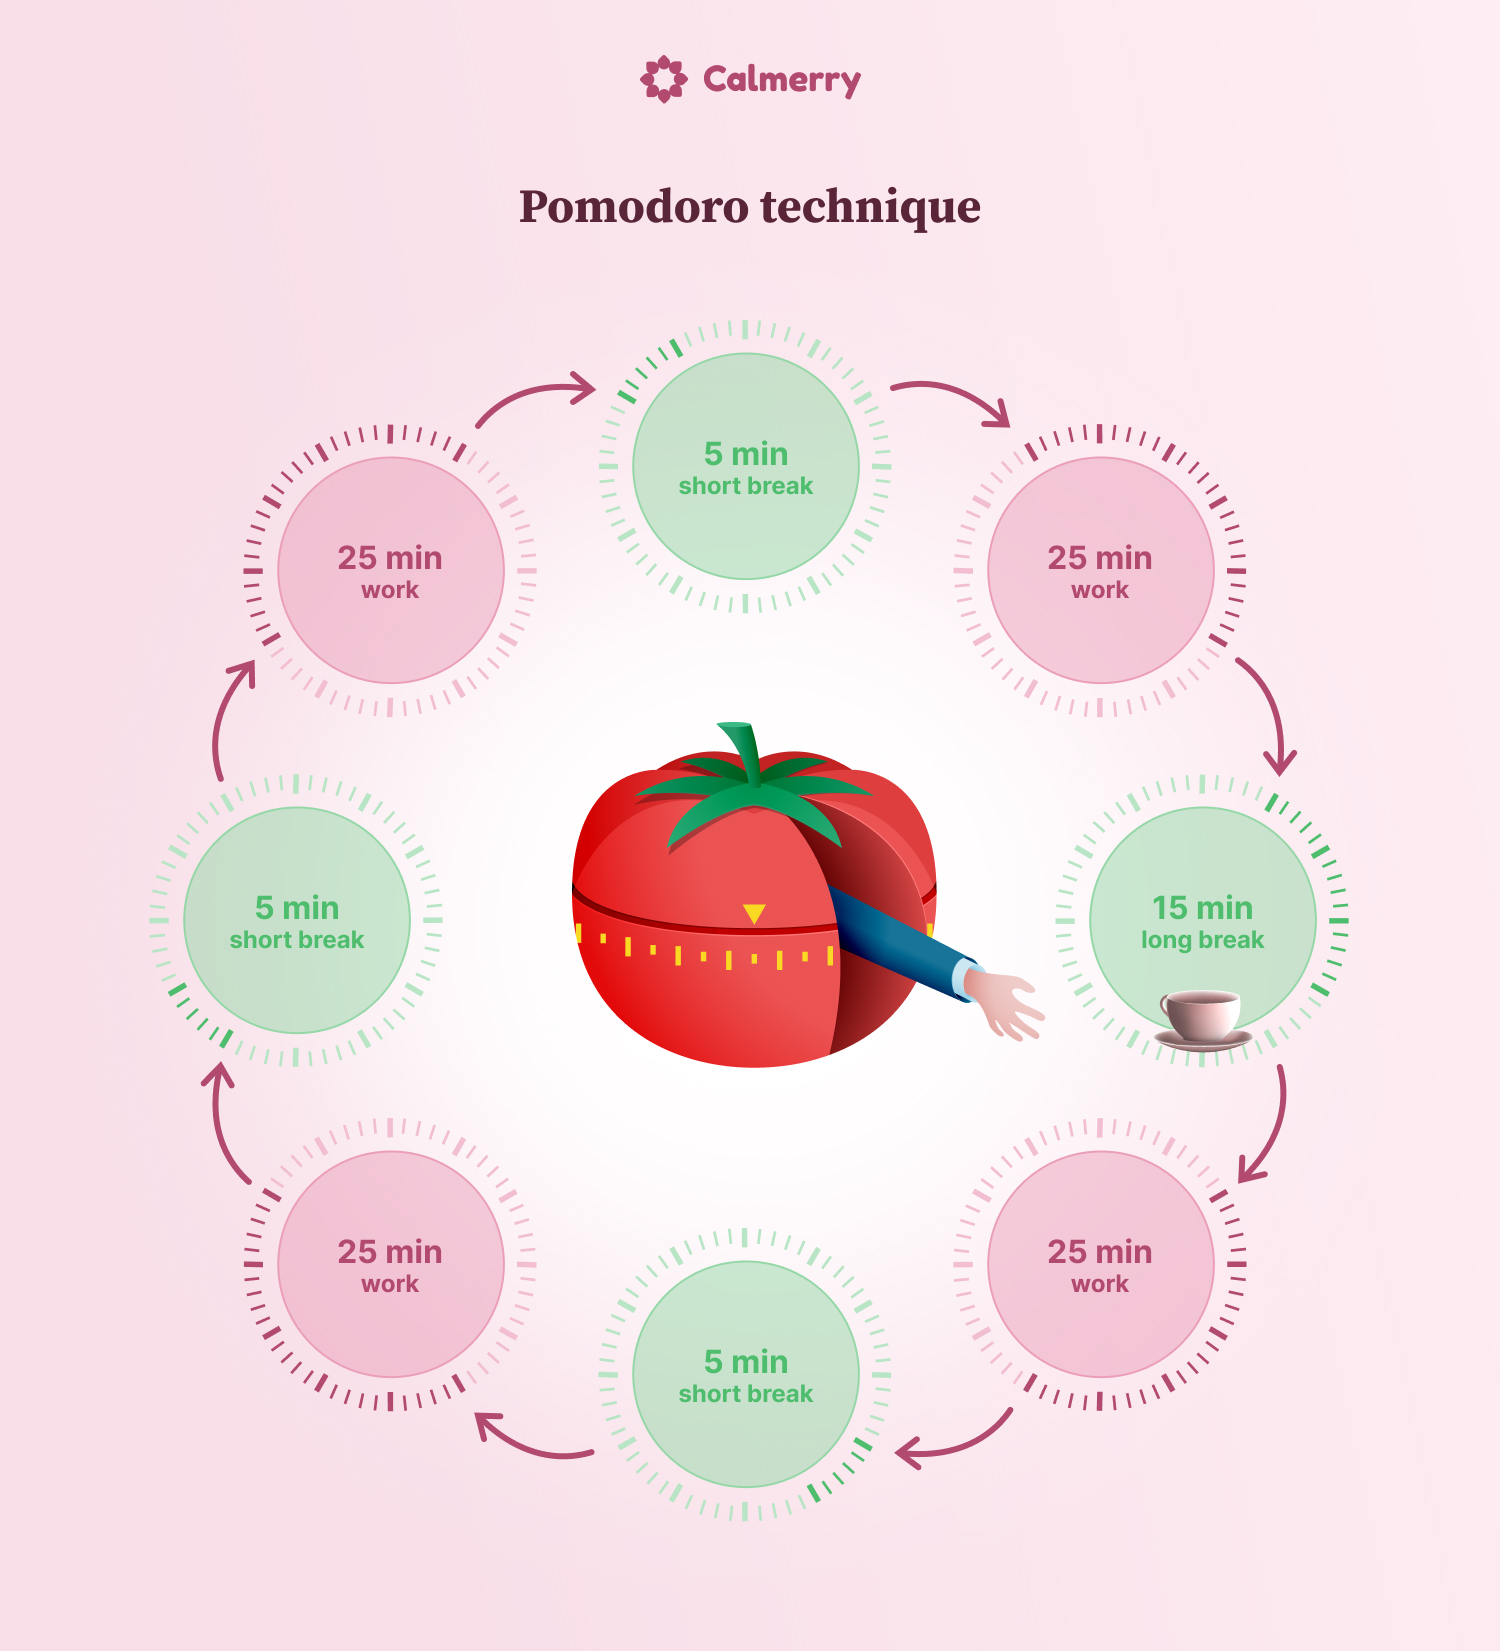 The Pomodoro technique is an effective method that involves 25 minutes of focused work followed by 5 minutes breaks. 